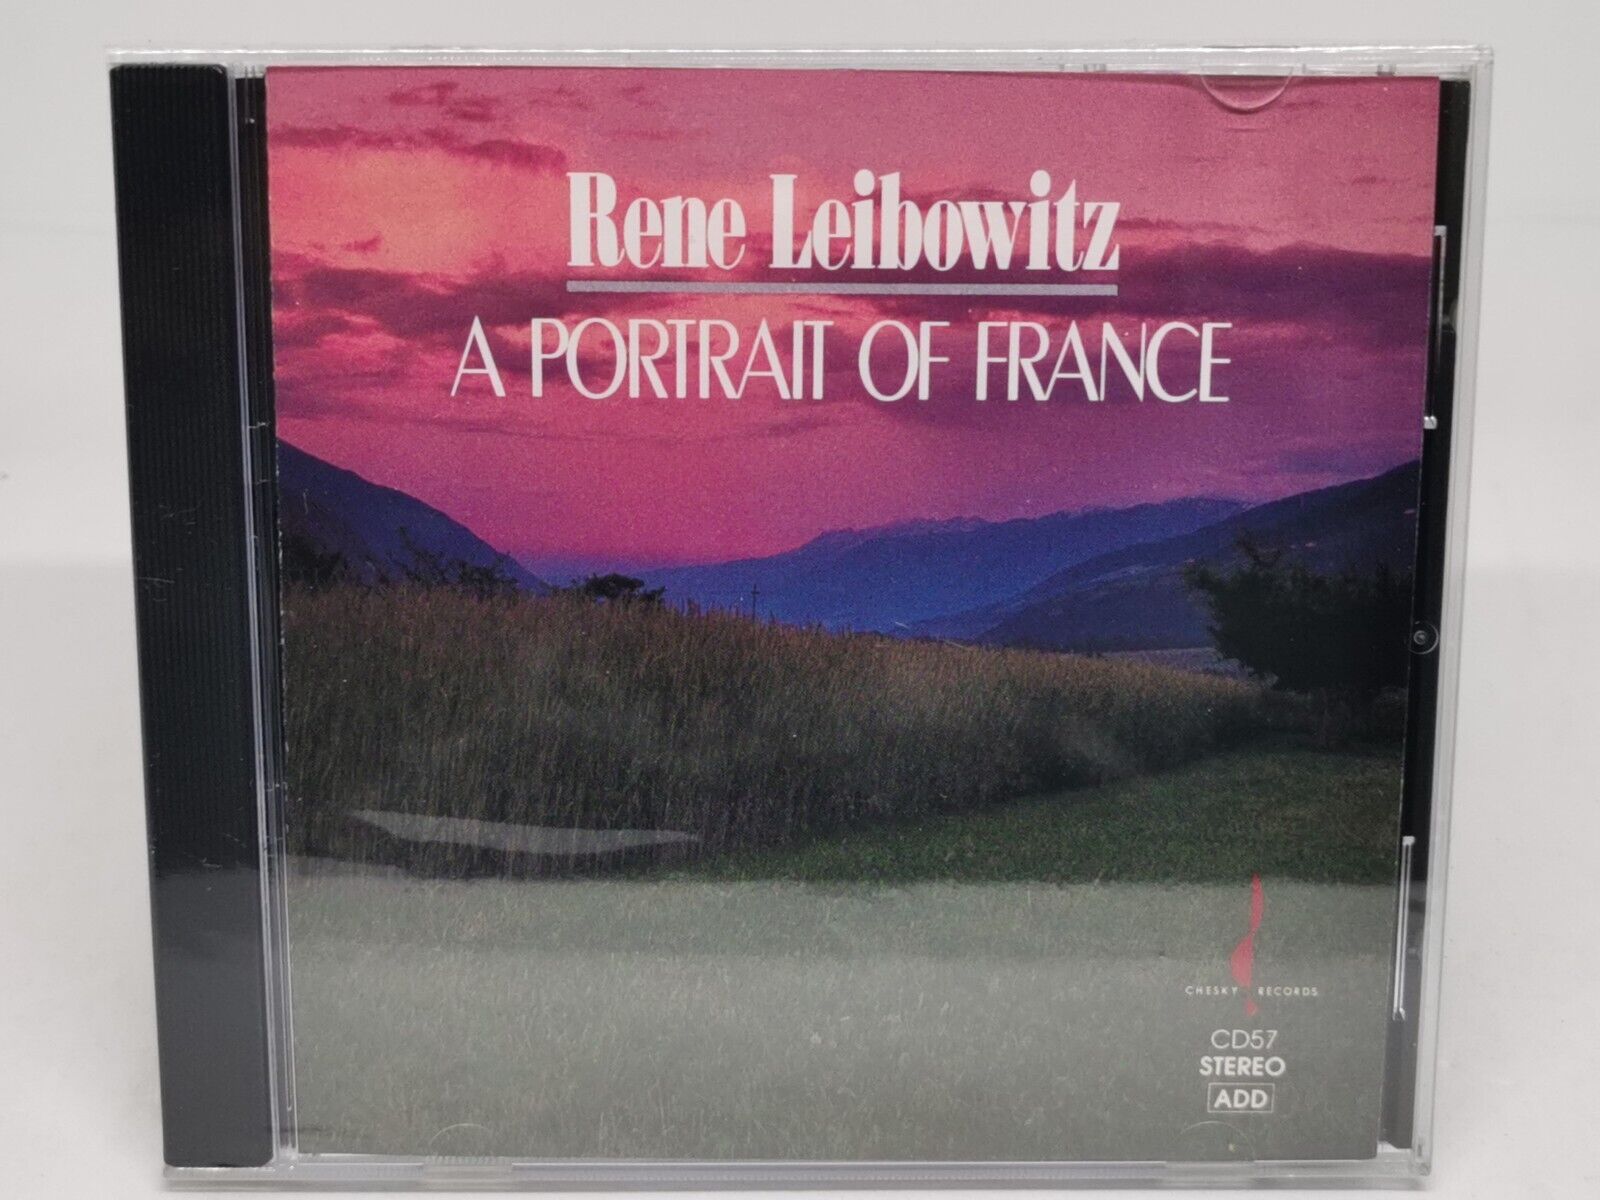 Portrait of France by Rene Leibowitz (CD, 1994)